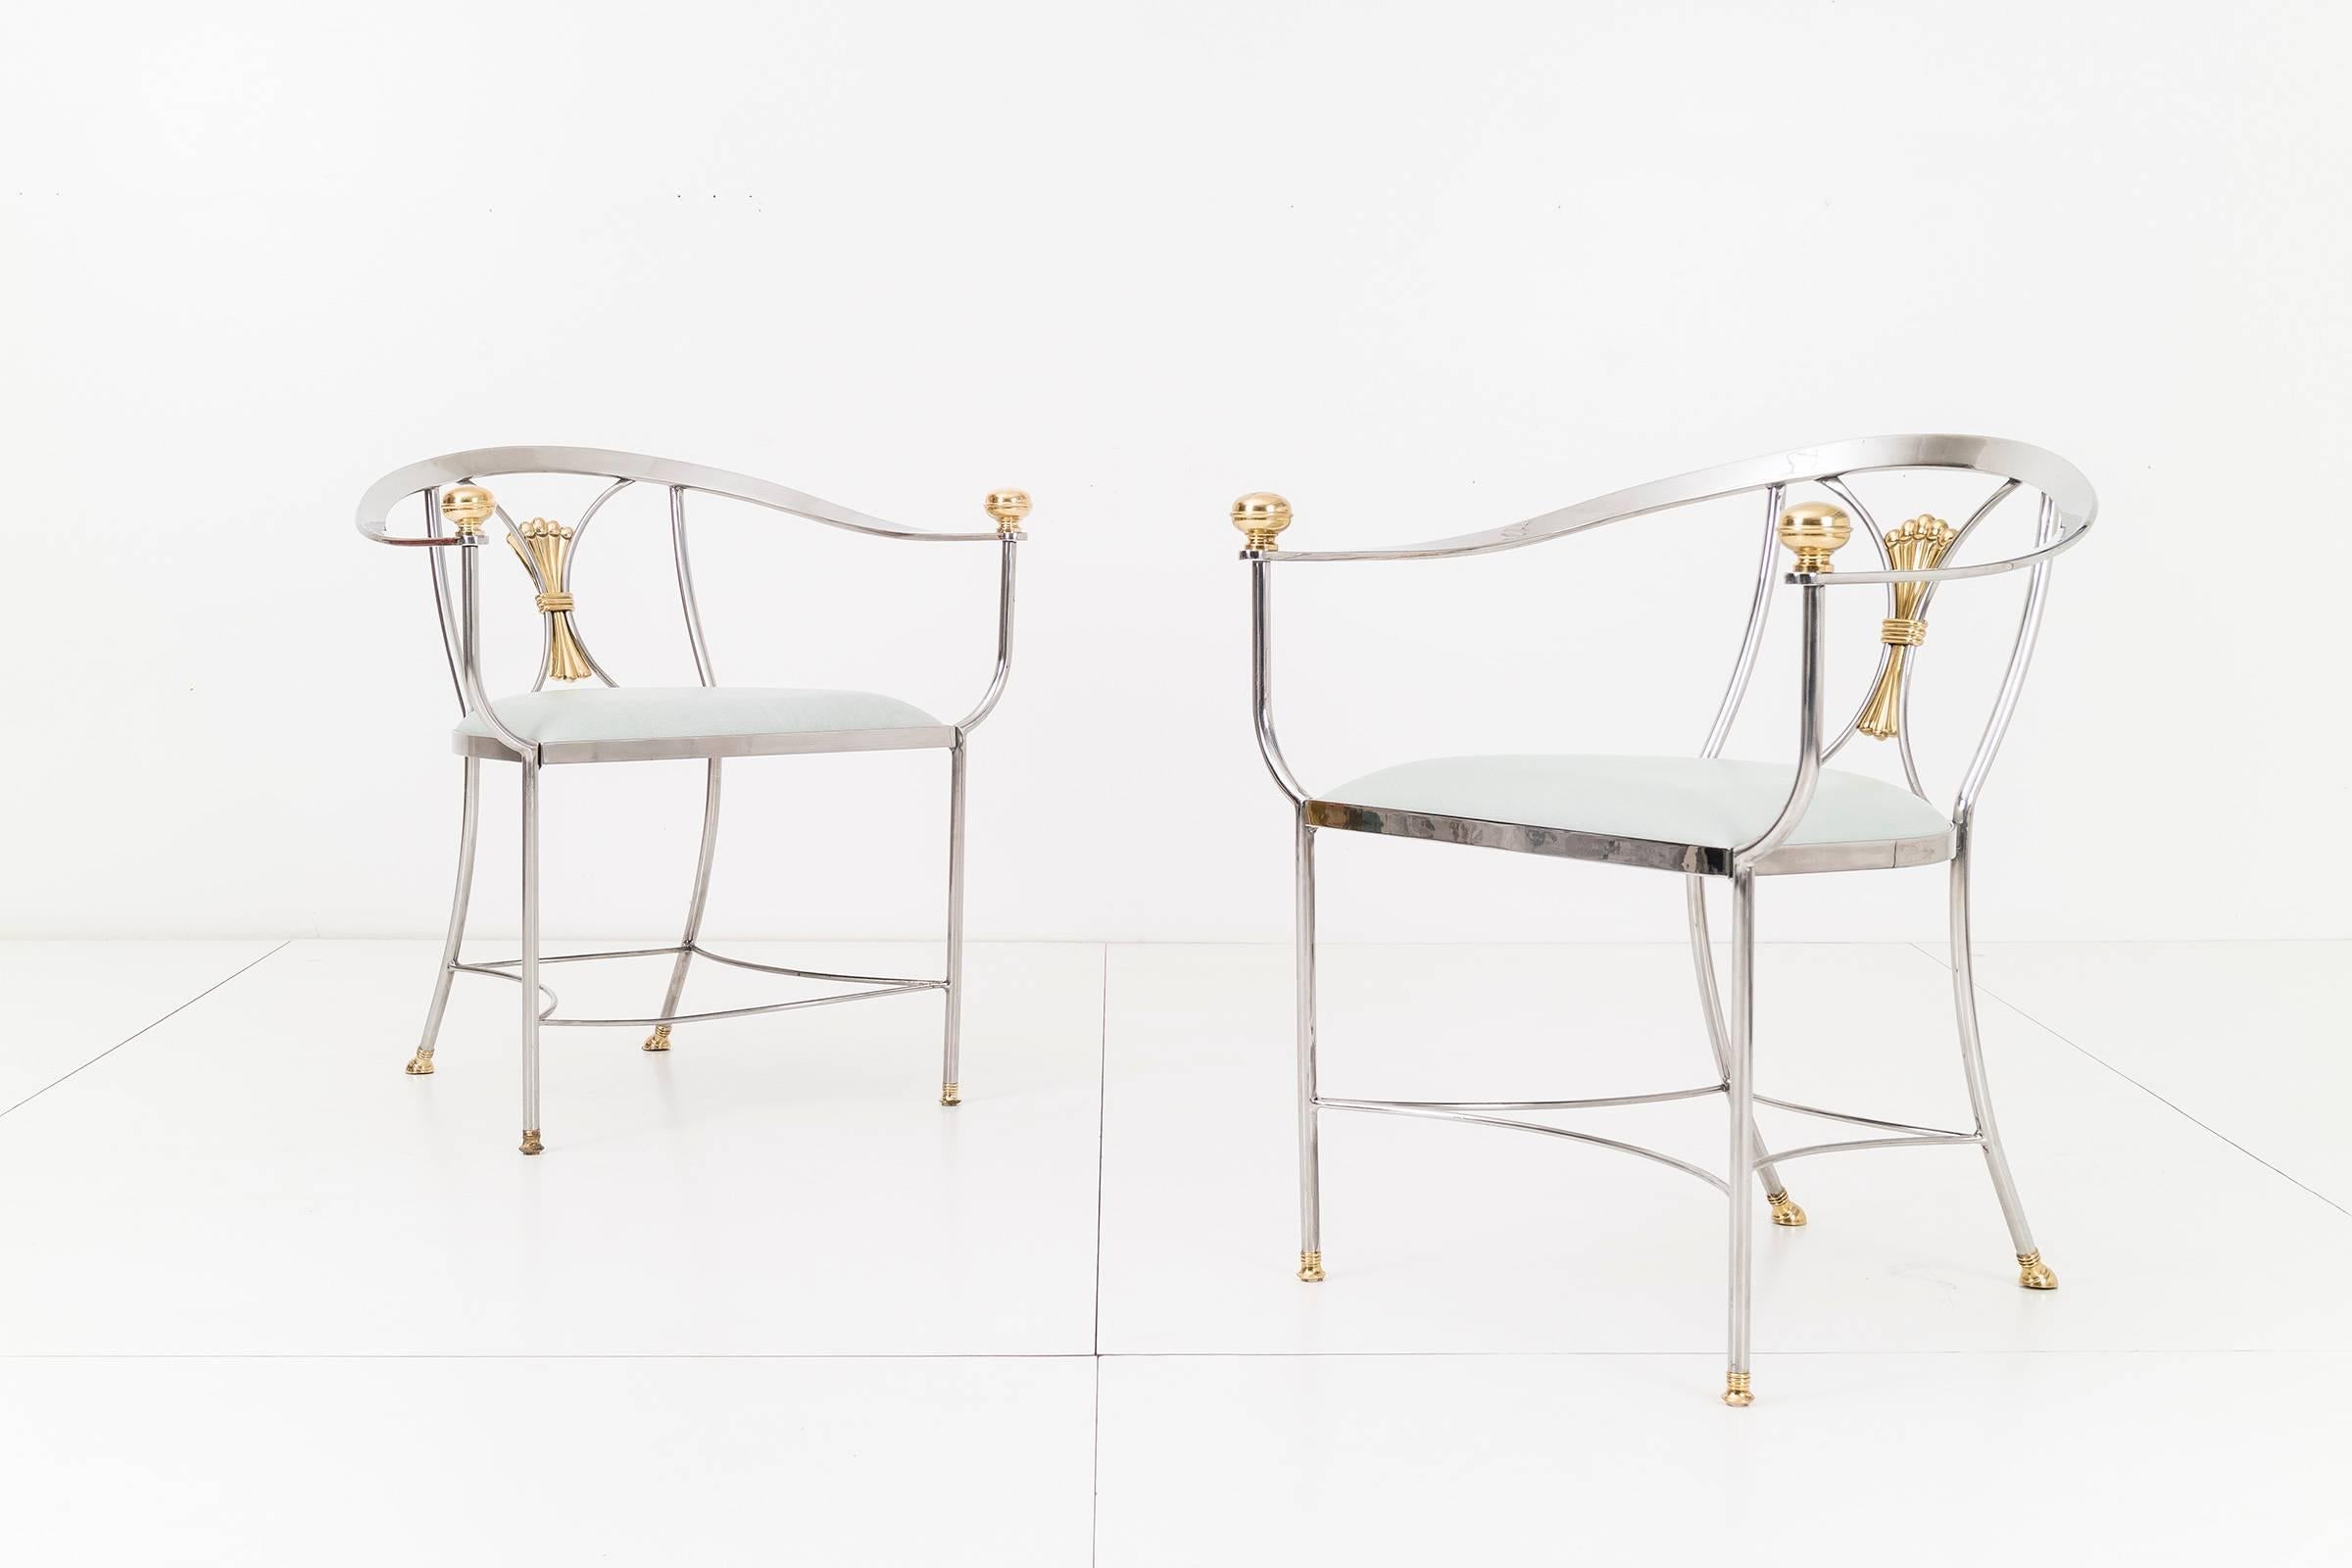 Alberto Orlandi occasional chairs, Italian Renaissance-revival Savonarola chair with sculptural polished metal and solid brass decorative details. Edelman leather reupholstered seats.
[stamped on backside of seat] shown in images.